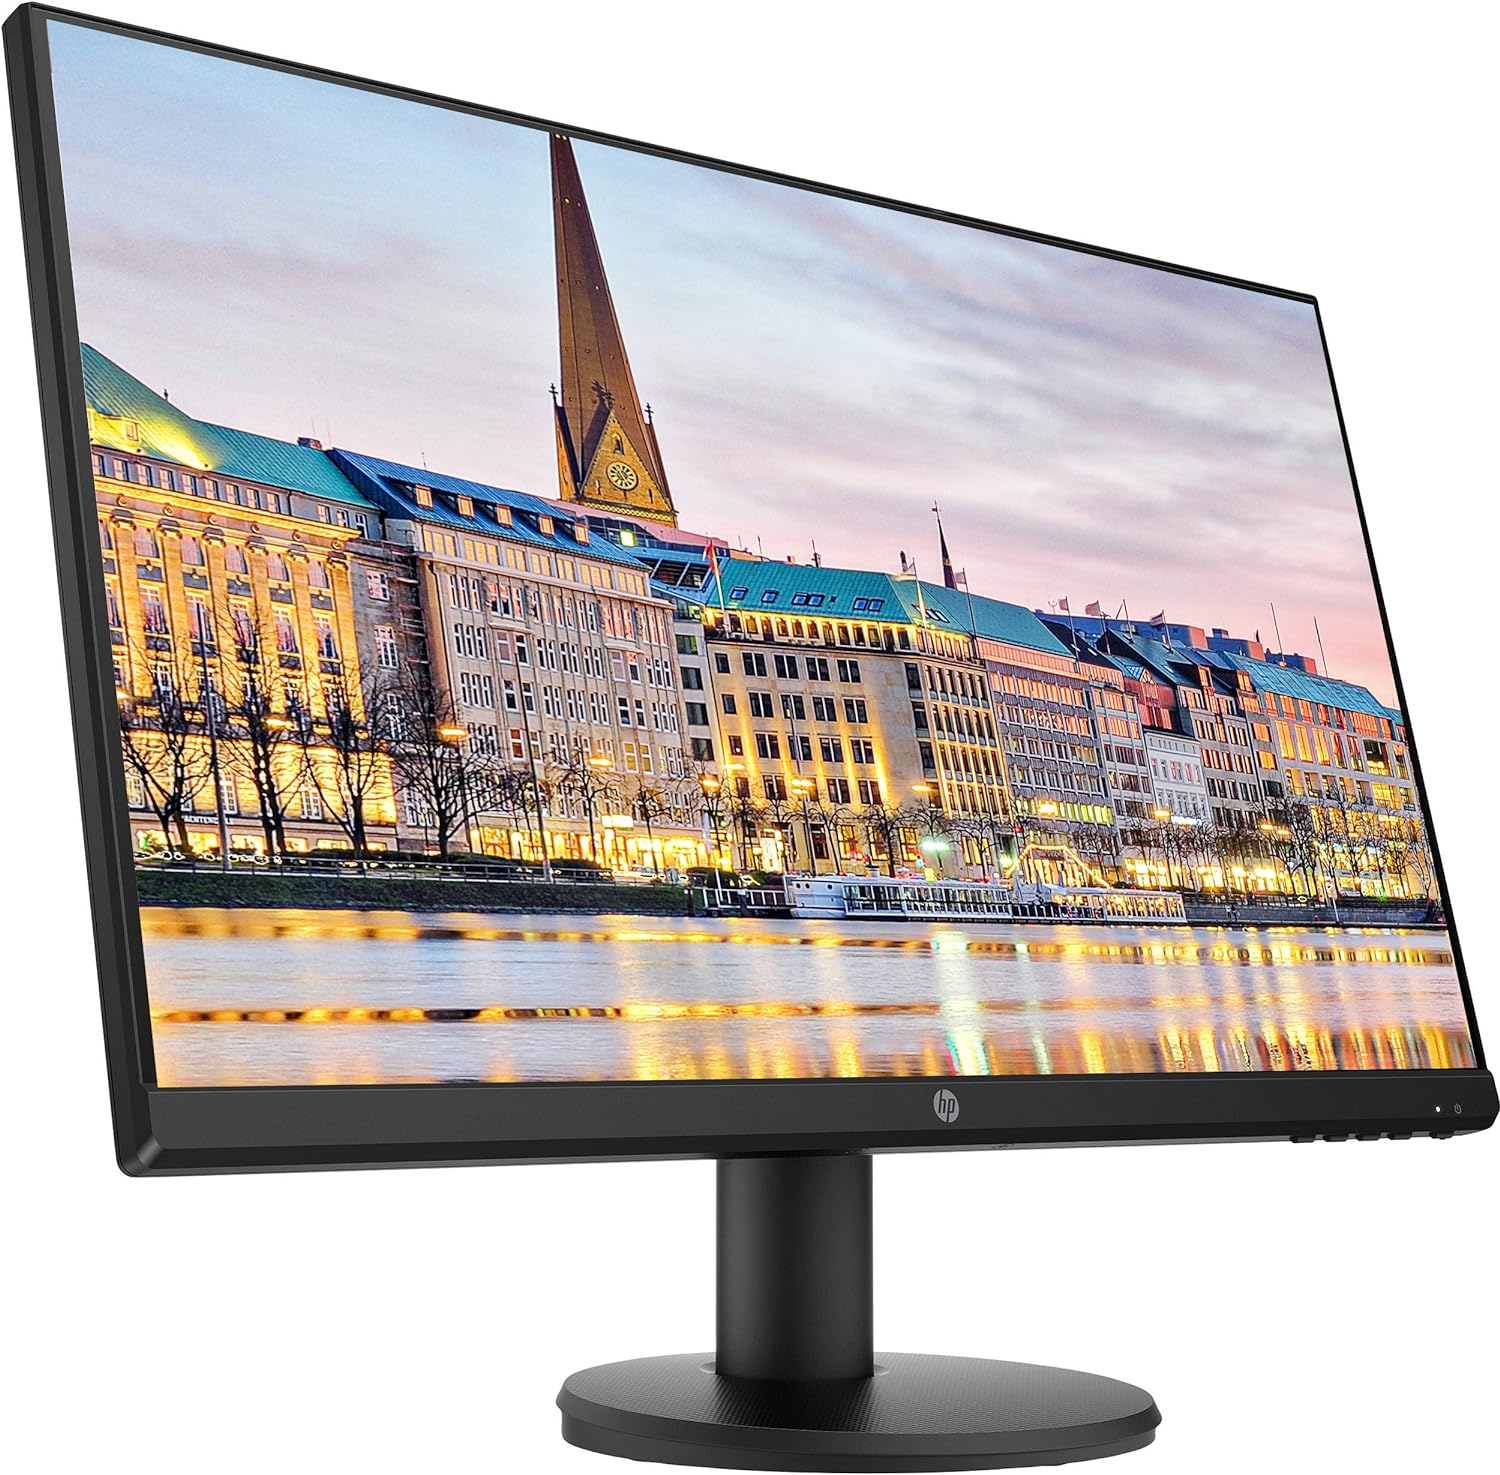 HP P24v G4 24 Inch FHD IPS LED-Backlit LCD 2-Pack Monitor Bundle with HDMI, Blue Light Filter, Dual Monitor Stand, MK270 Wireless Keyboard and Mouse Combo, Gel Pad